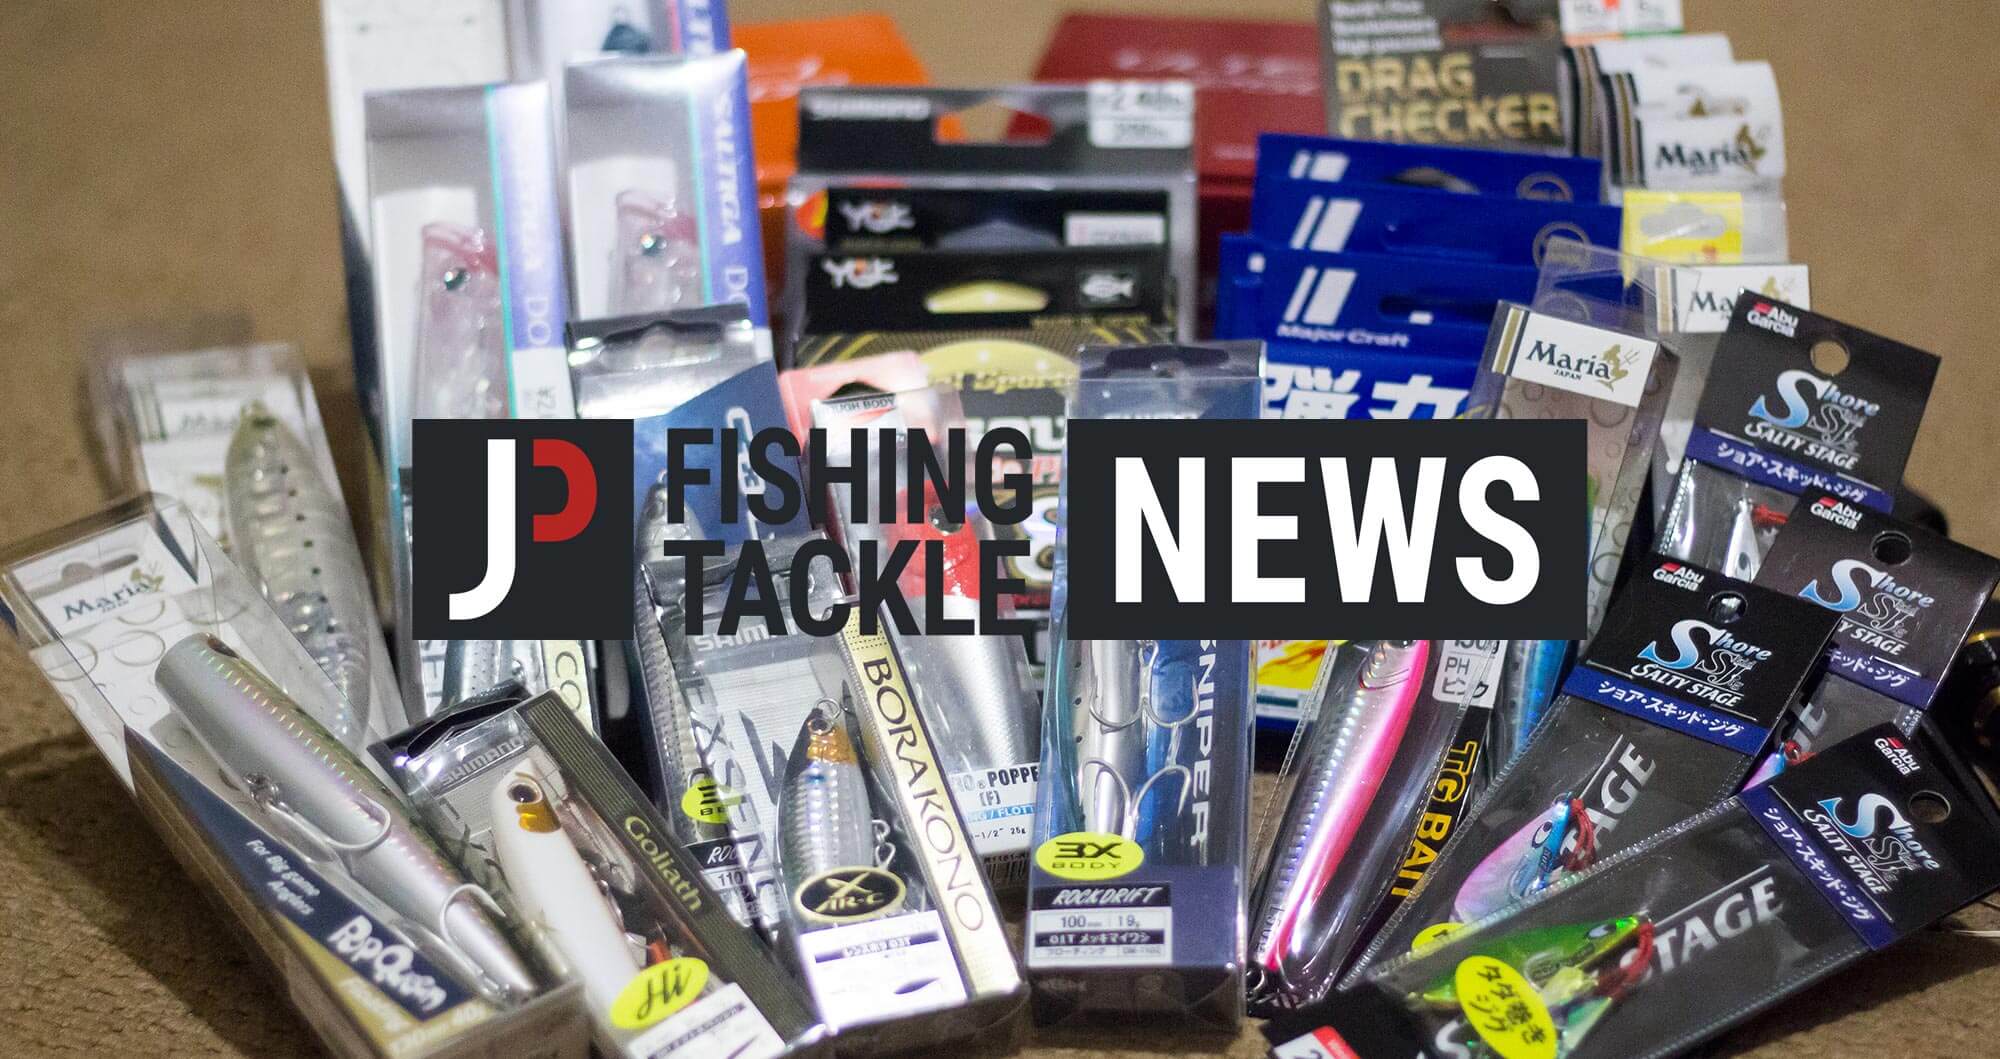 Our Fishing Tackle Shop Is Open Now! - Japan Fishing and Tackle News